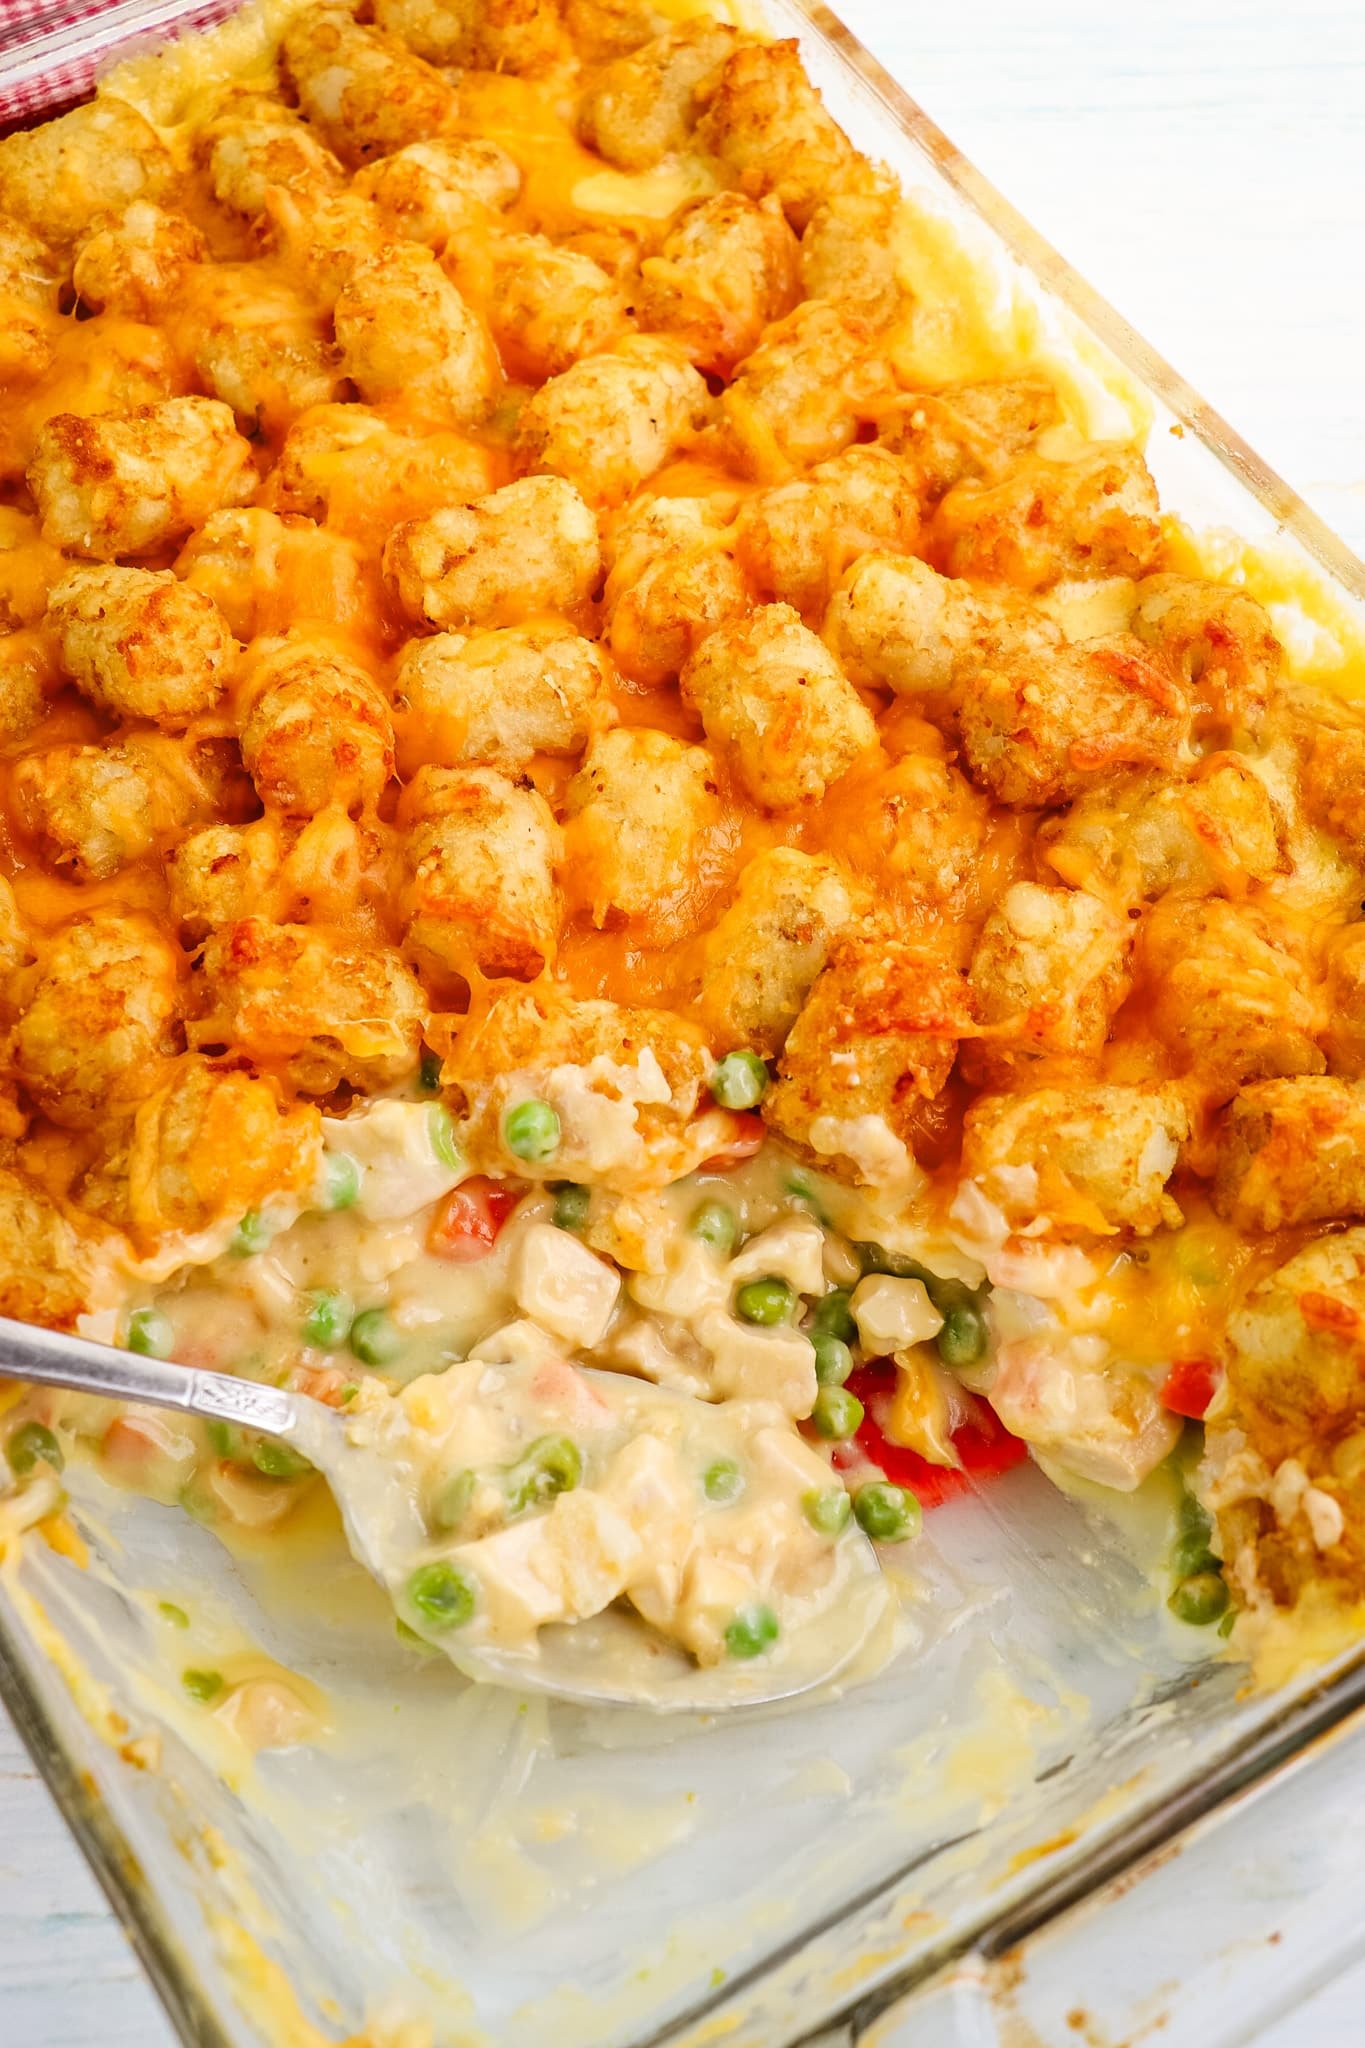 Tater tot casserole with chicken in a glass baking dish with spoon in the center.